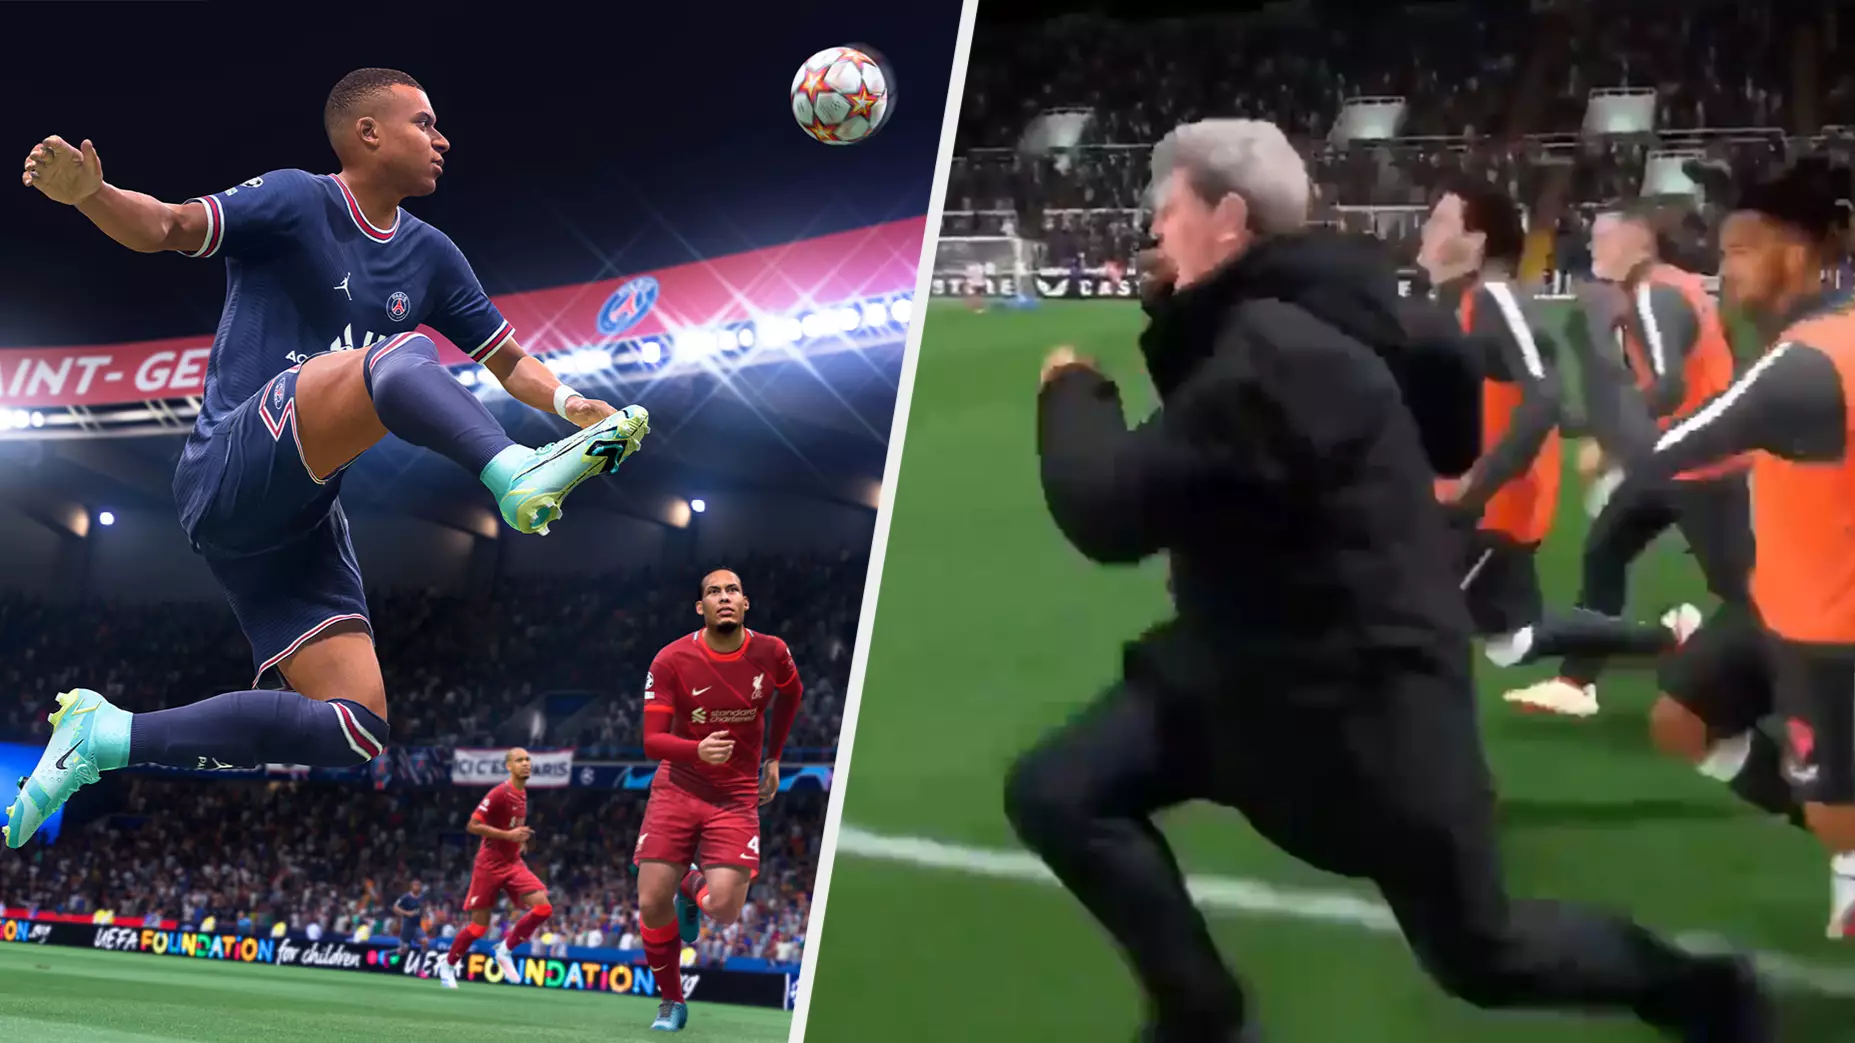 Newcastle Player Confused That 60-Year-Old Manager Has More Pace Than Him In 'FIFA 22'